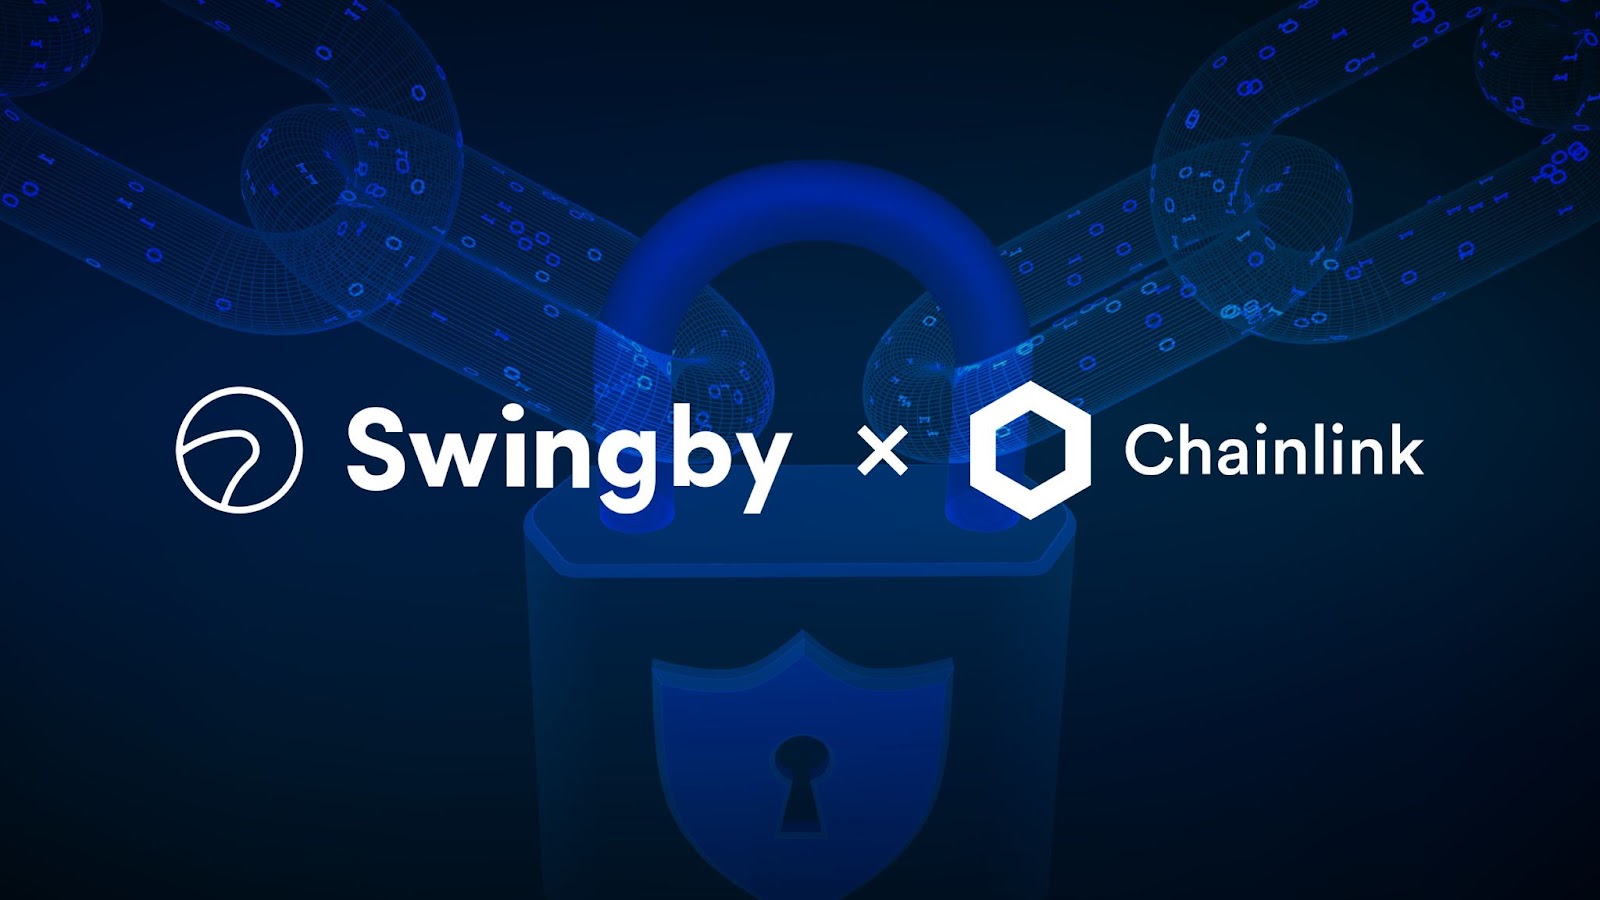 Swingby Partners With Chainlink To Secure Bitcoin Bridge – Press release Bitcoin News